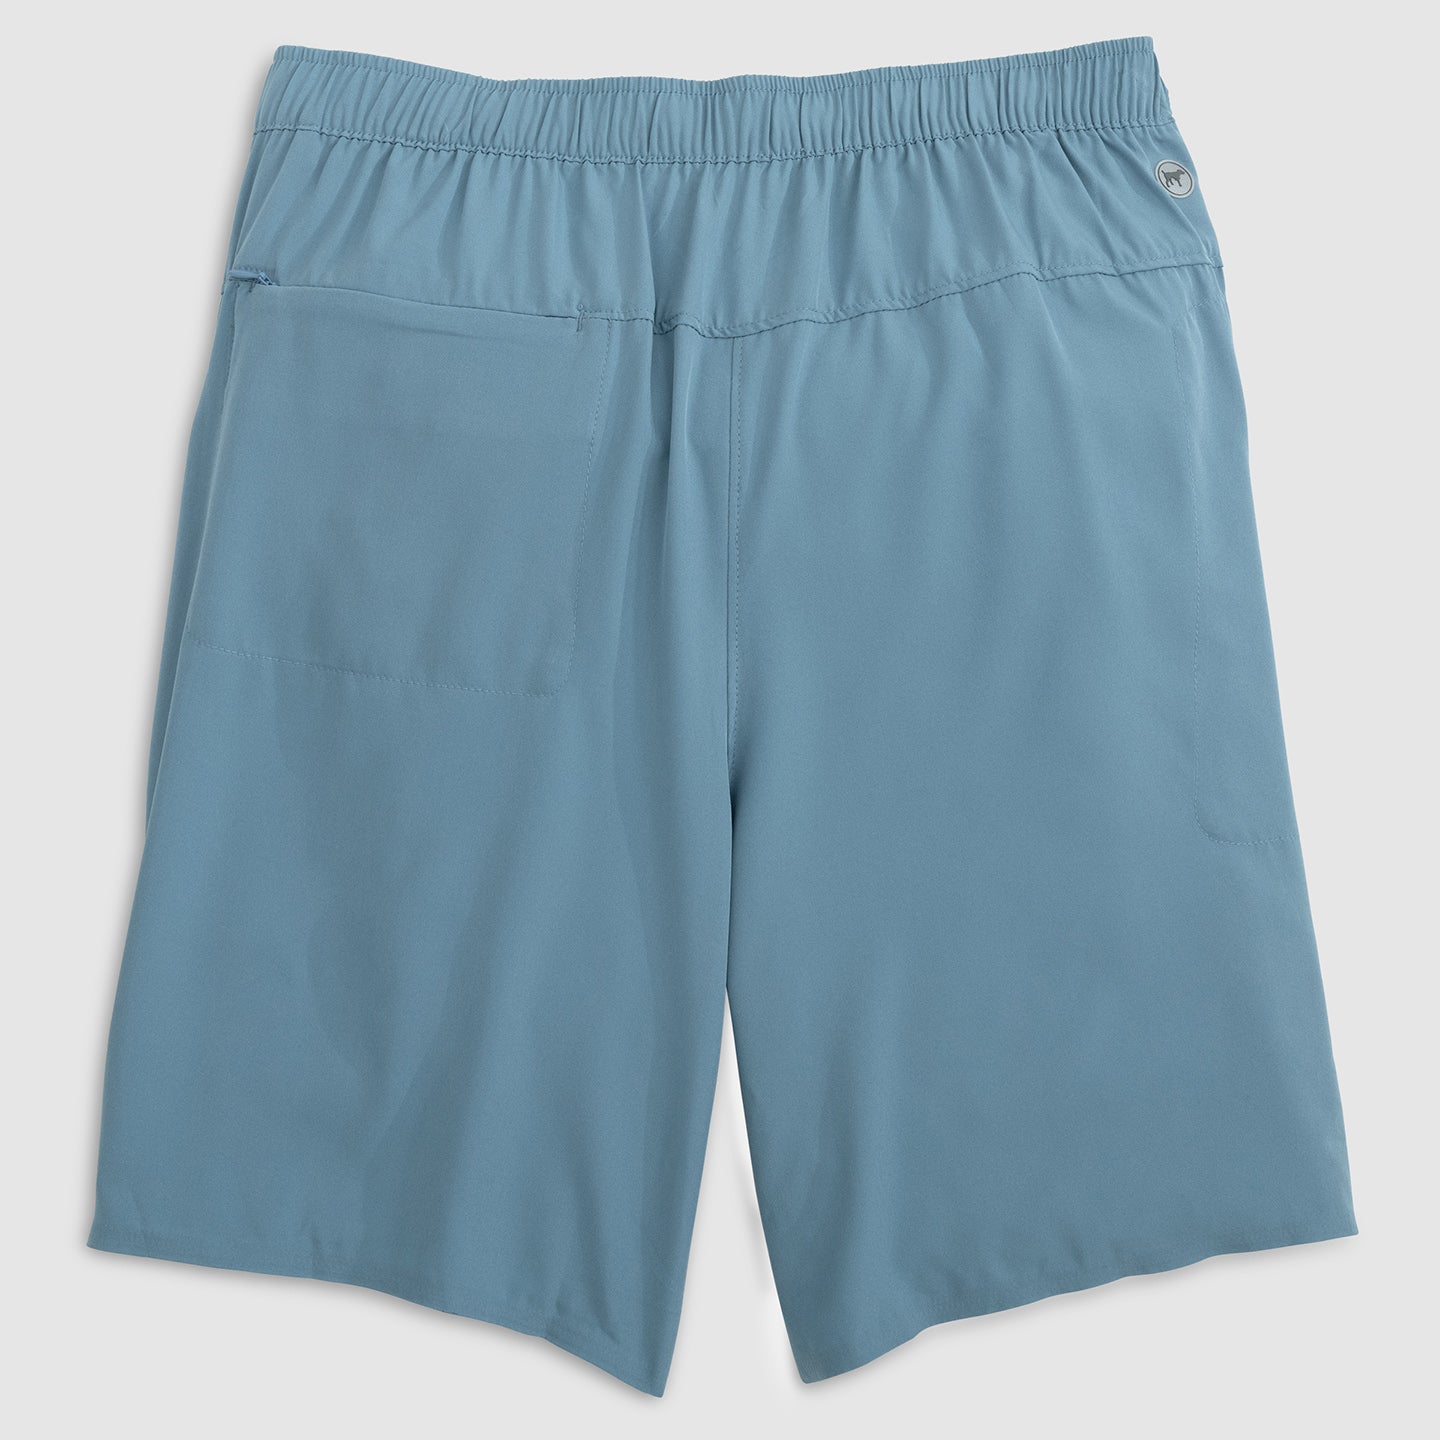 men's all conditions shorts